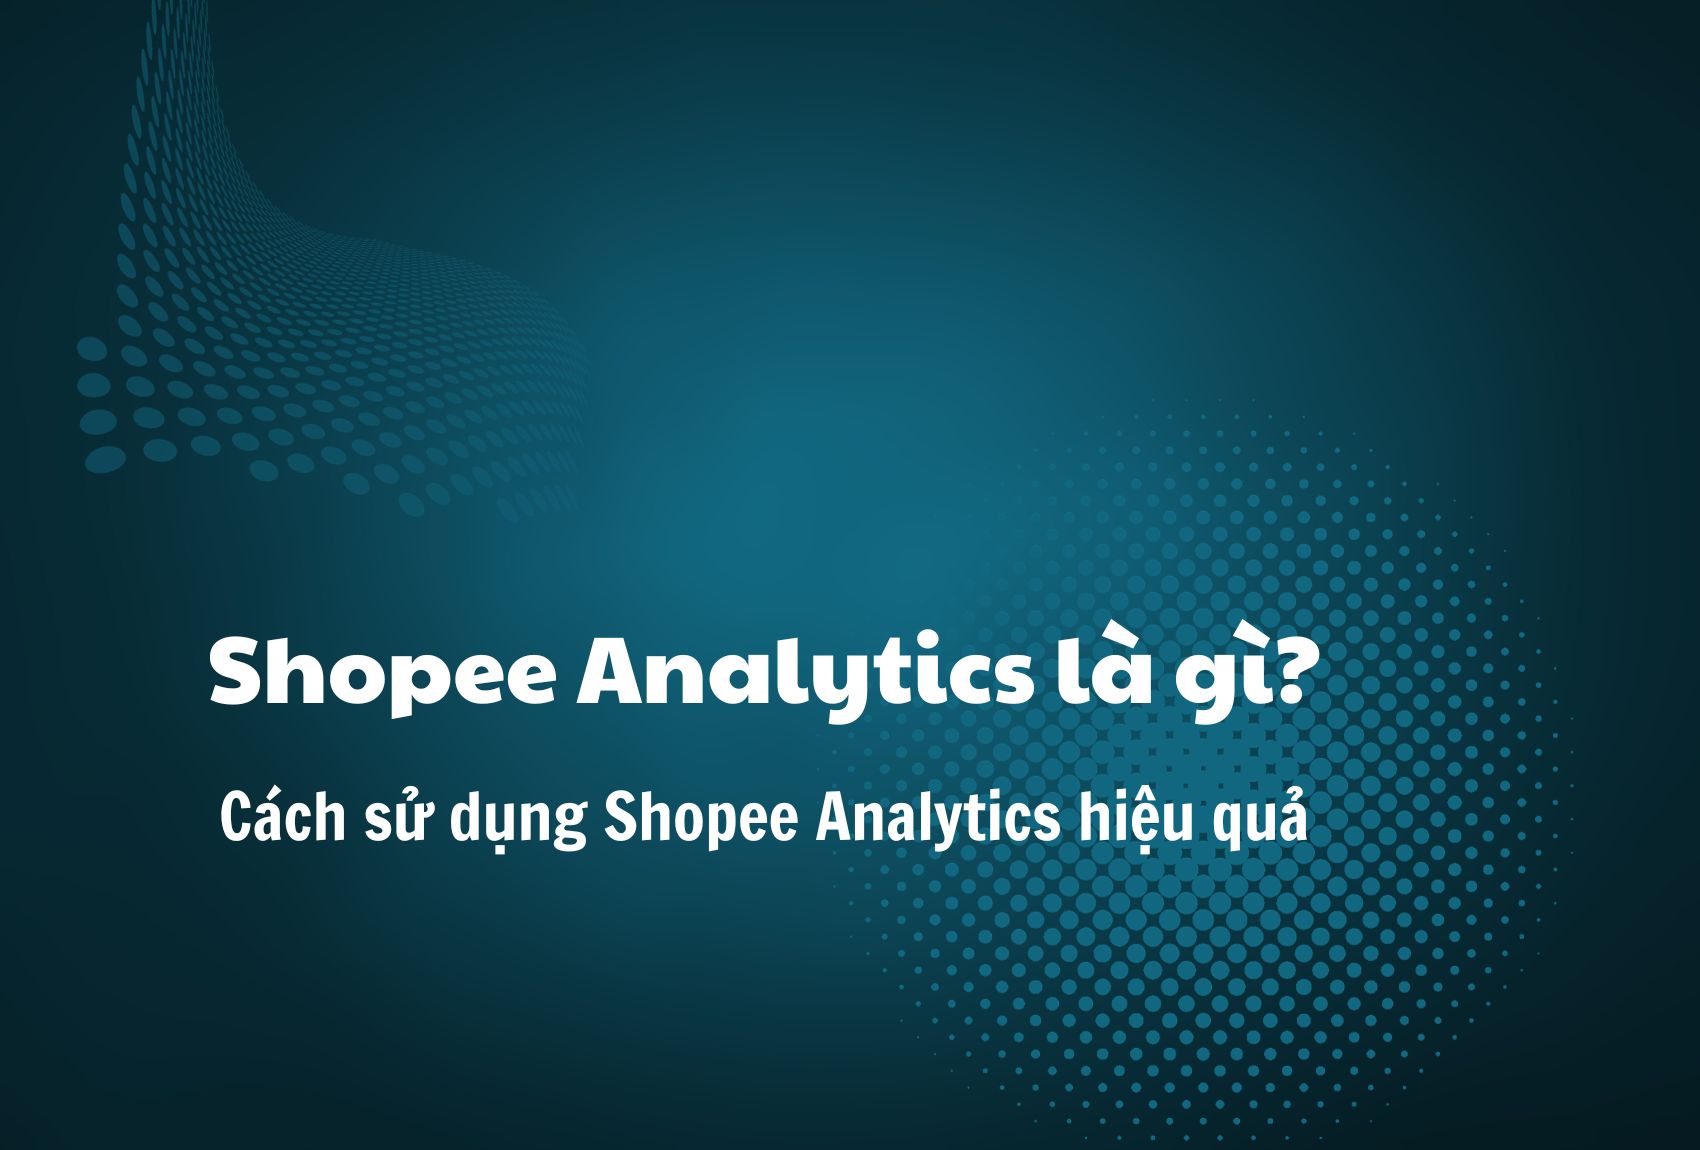 What is Shopee Analytics? How to use Shopee Analytics effectively